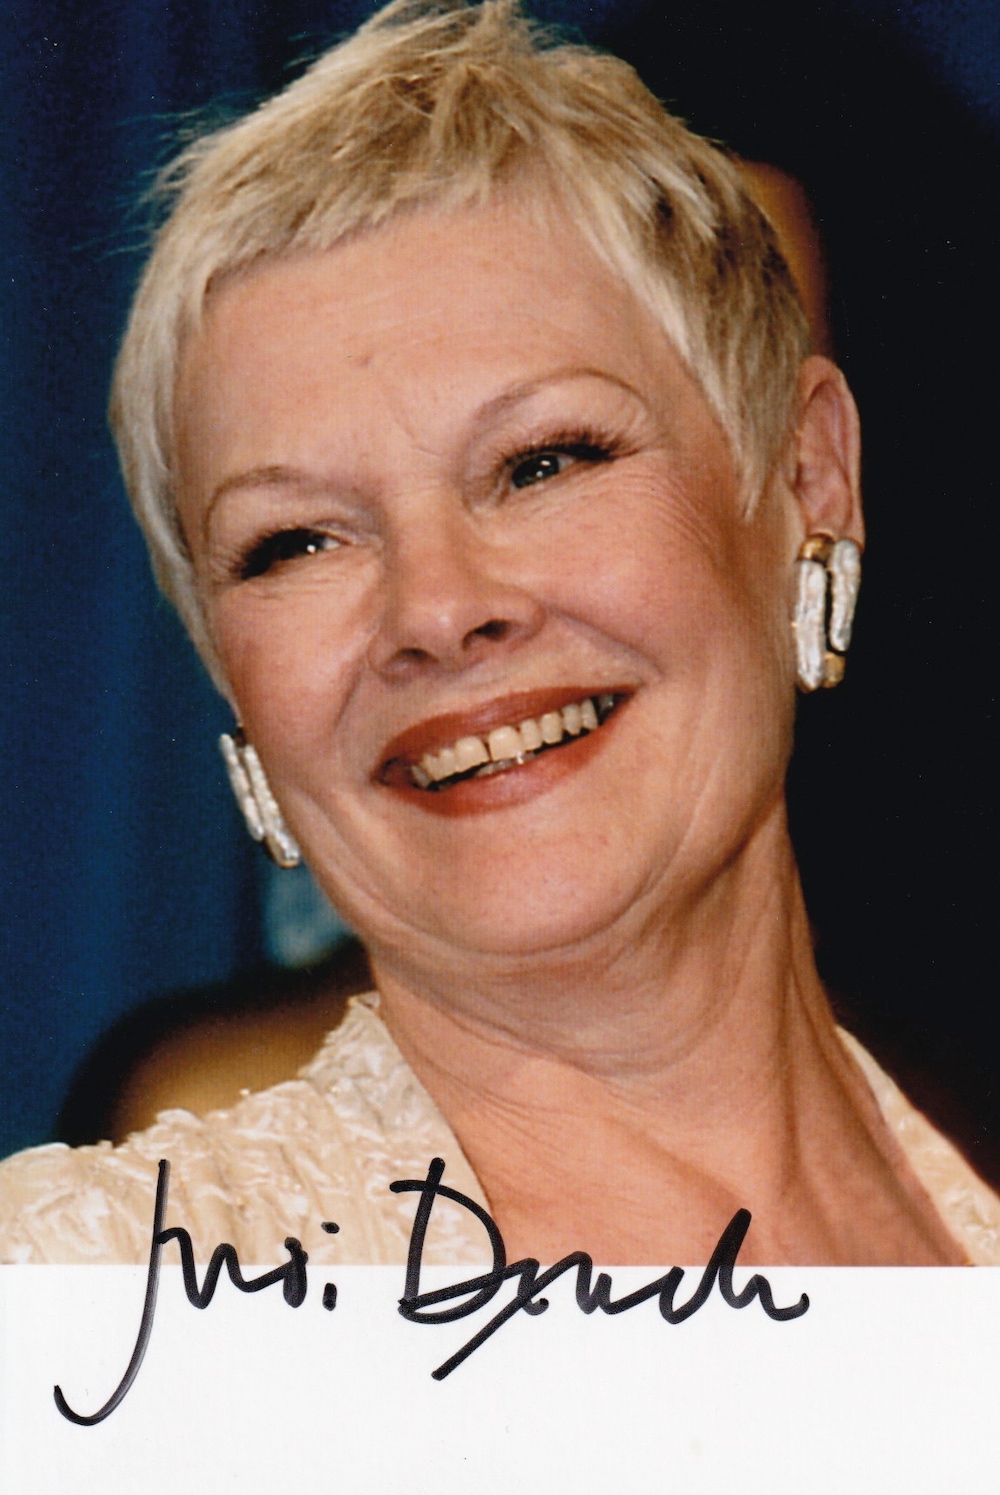 Judi Dench, James Bond Film Actress, 6x4 Signed Photo. Good condition. All autographs come with a